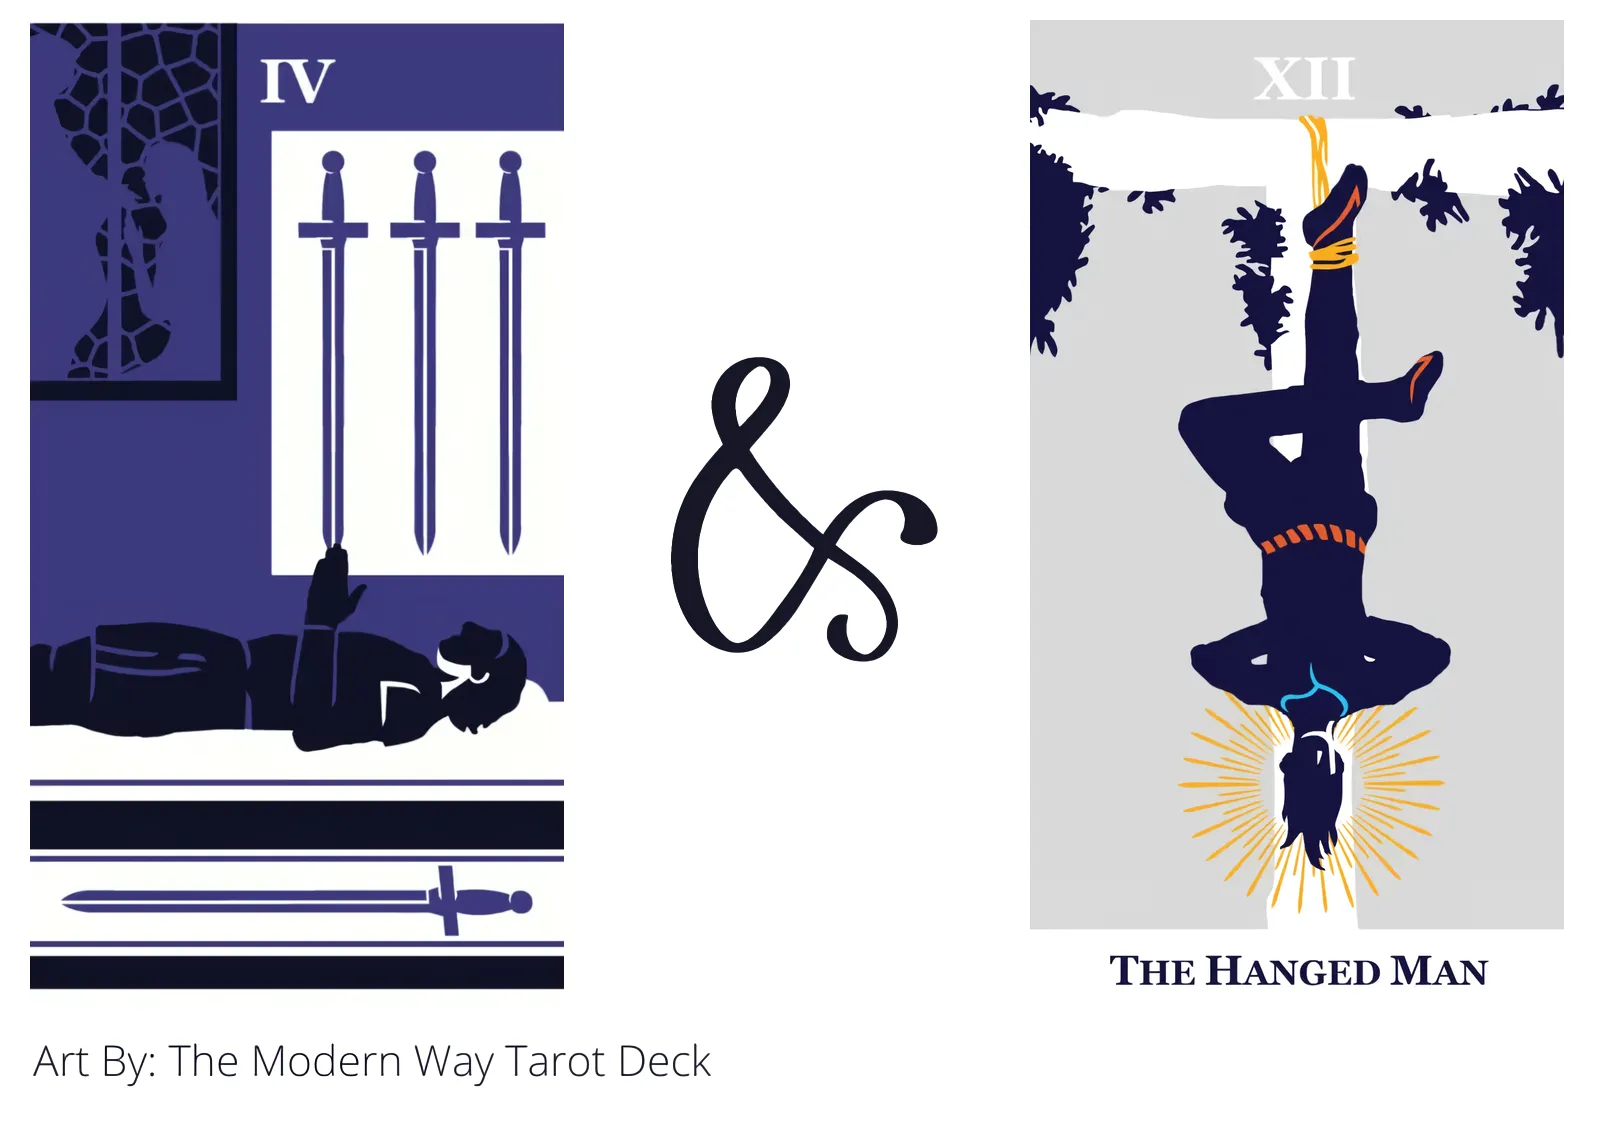 The Hanged Man Tarot Card  The Hanged Man Meaning, Description & One Card  Pull